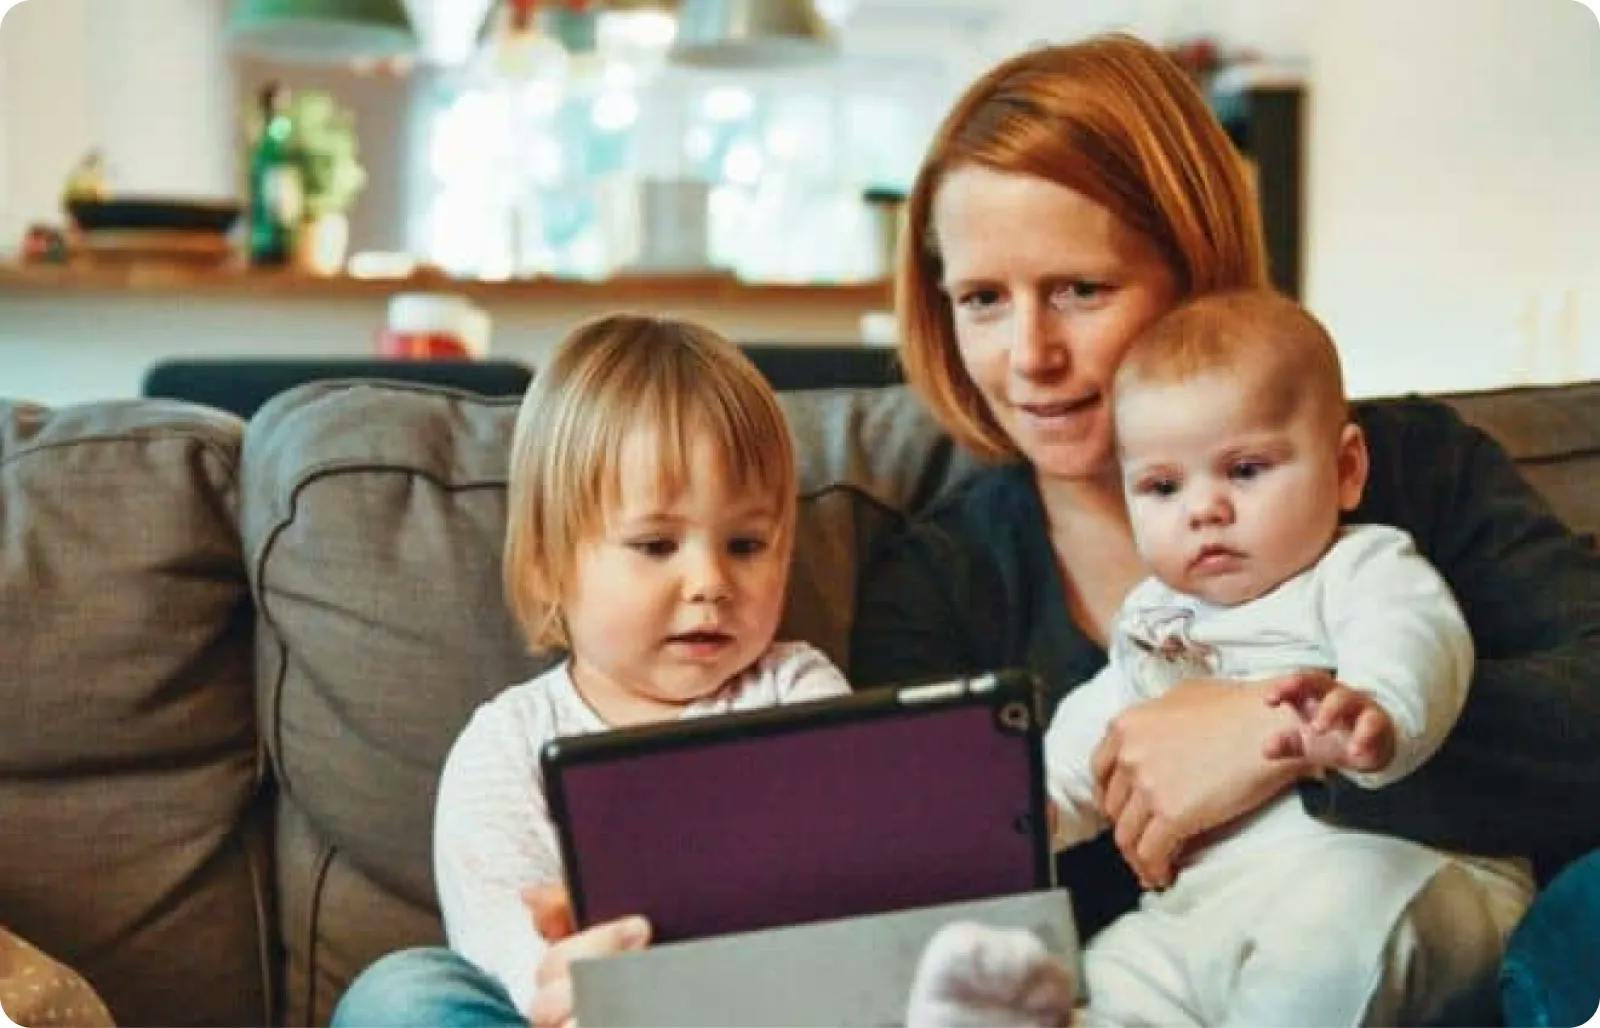 A woman and two children sitting on a couch, engrossed in a tablet.